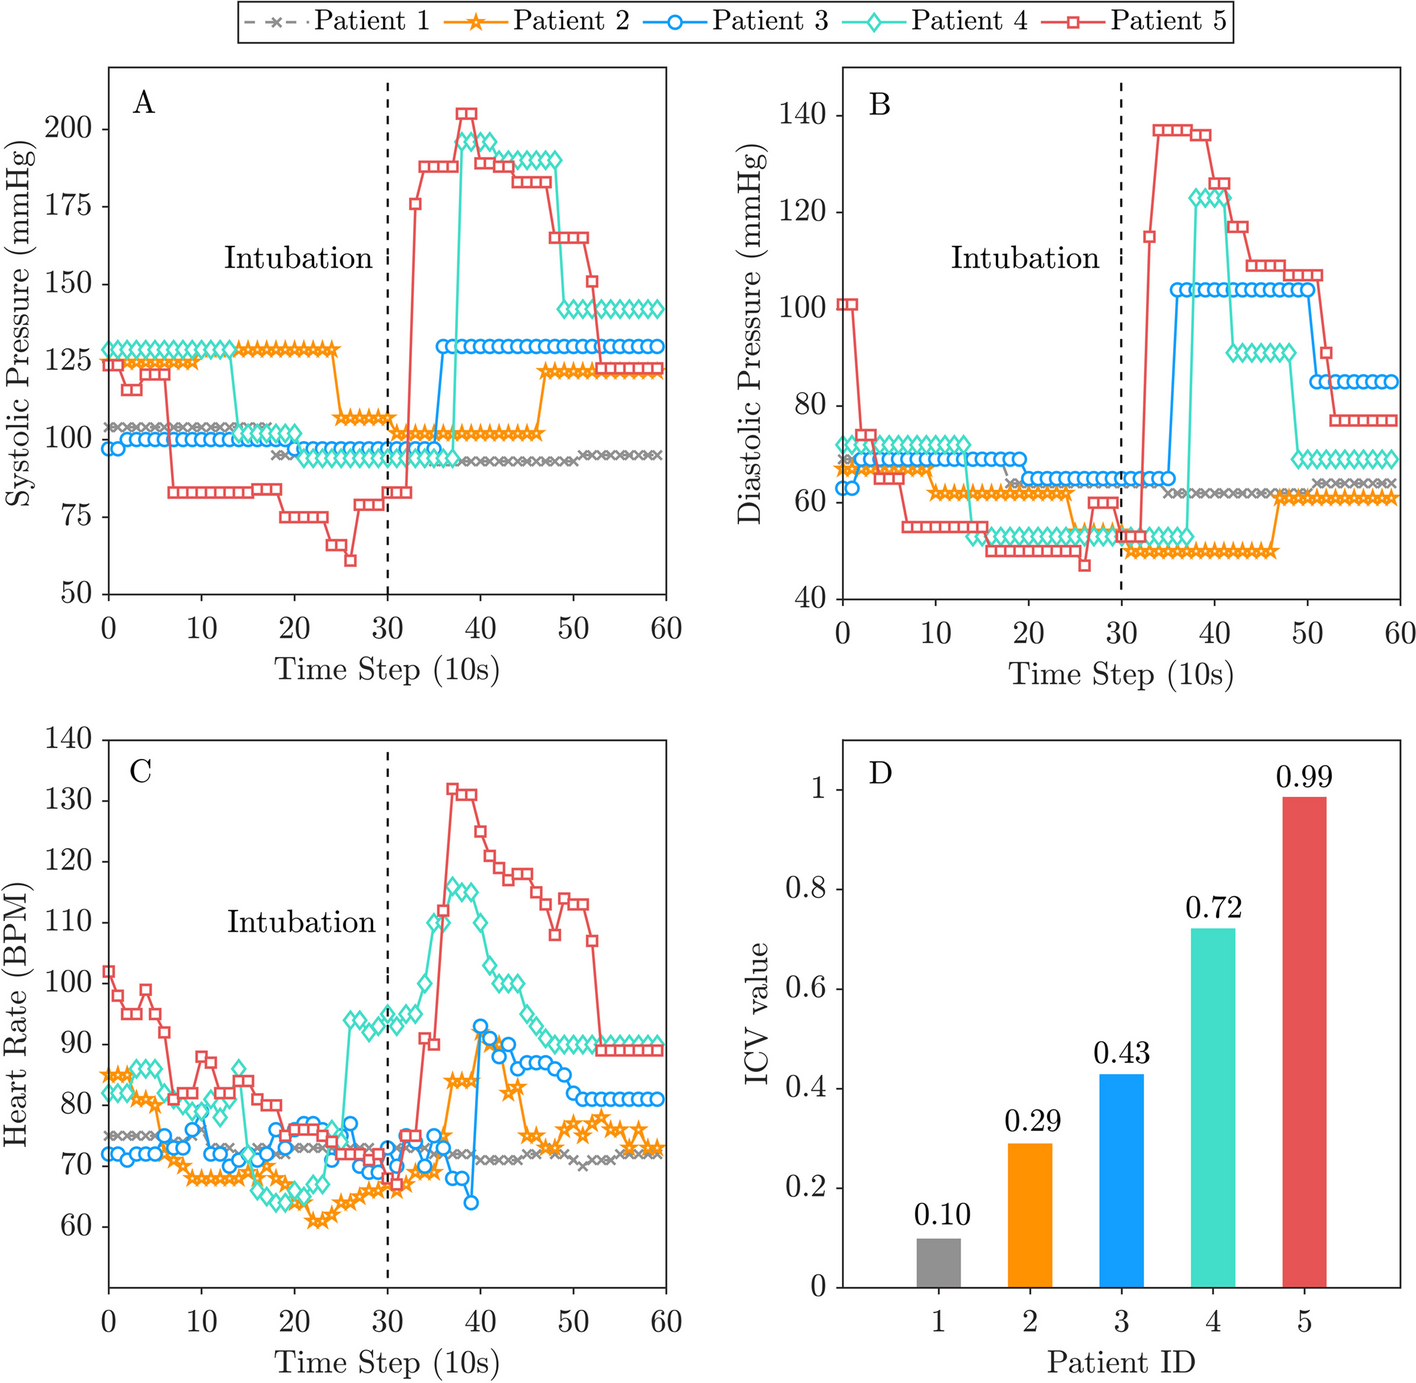 Machine learning approach for predicting post-intubation hemodynamic instability (PIHI) index values: towards enhanced perioperative anesthesia quality and safety